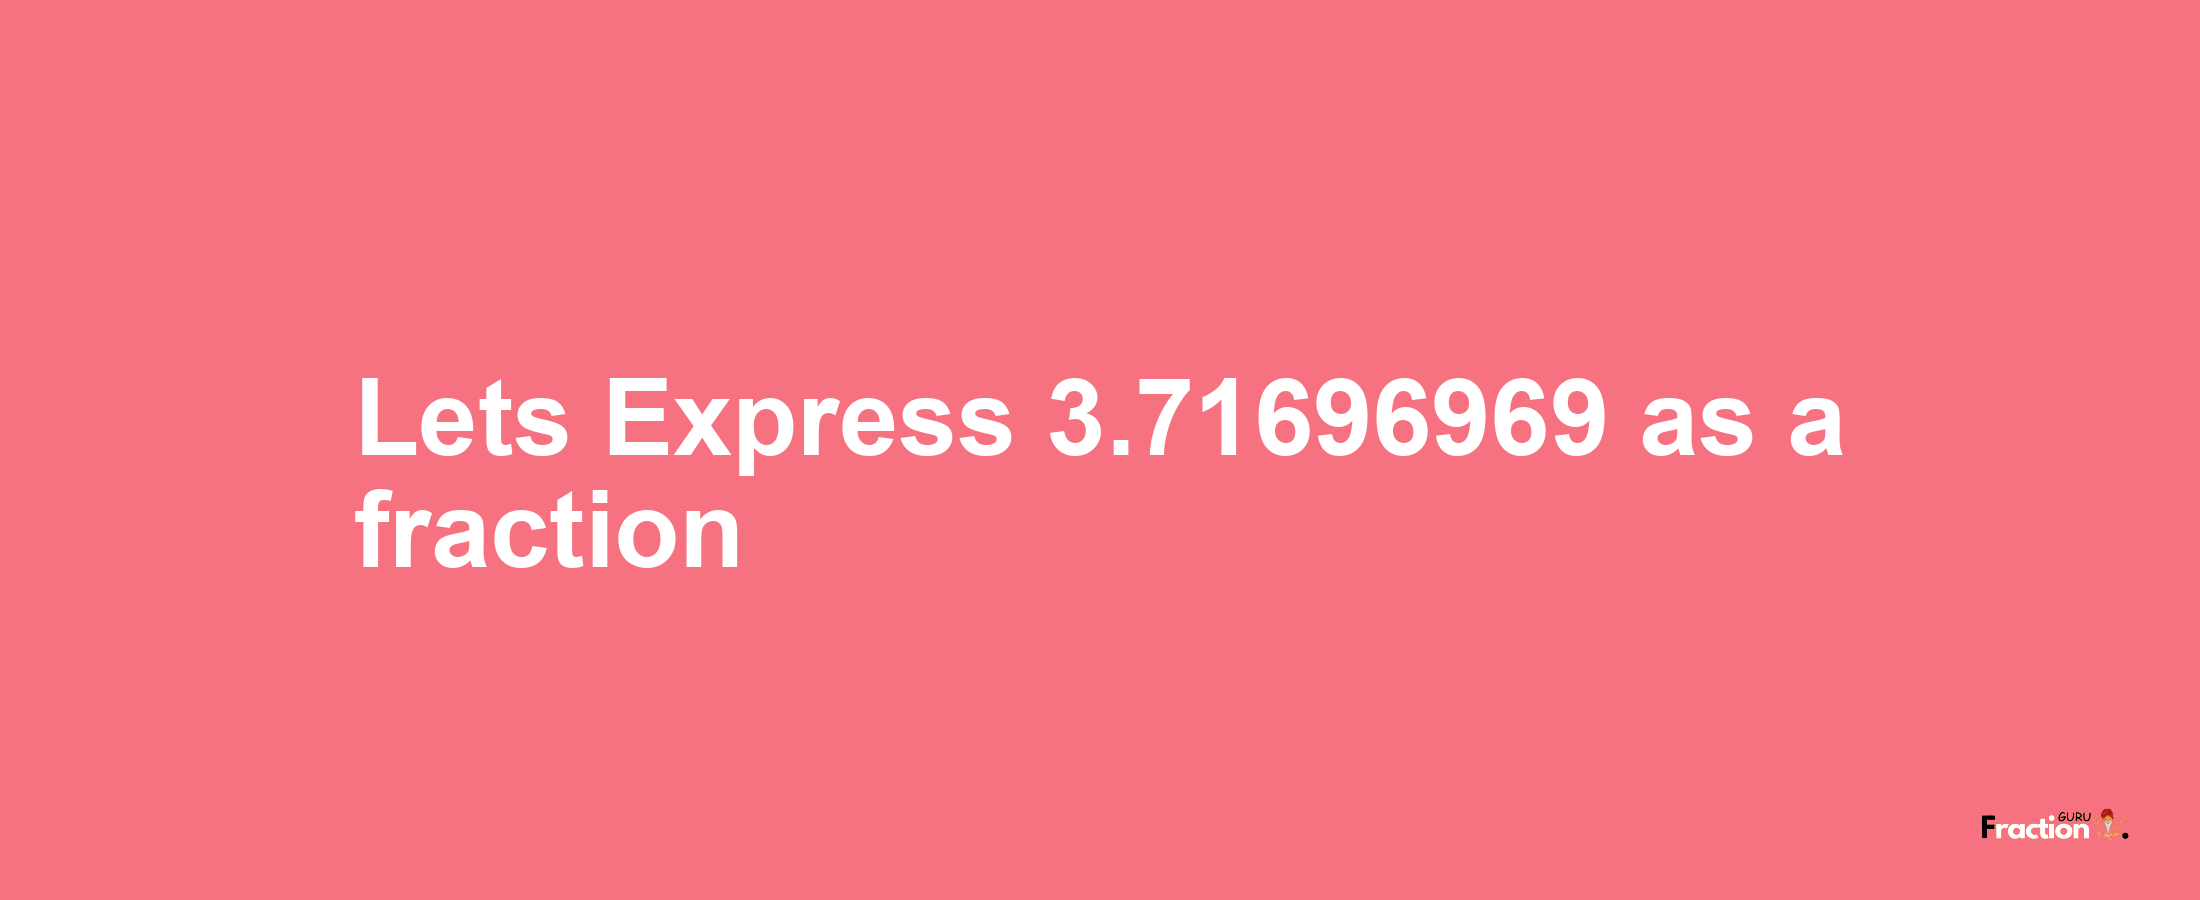 Lets Express 3.71696969 as afraction